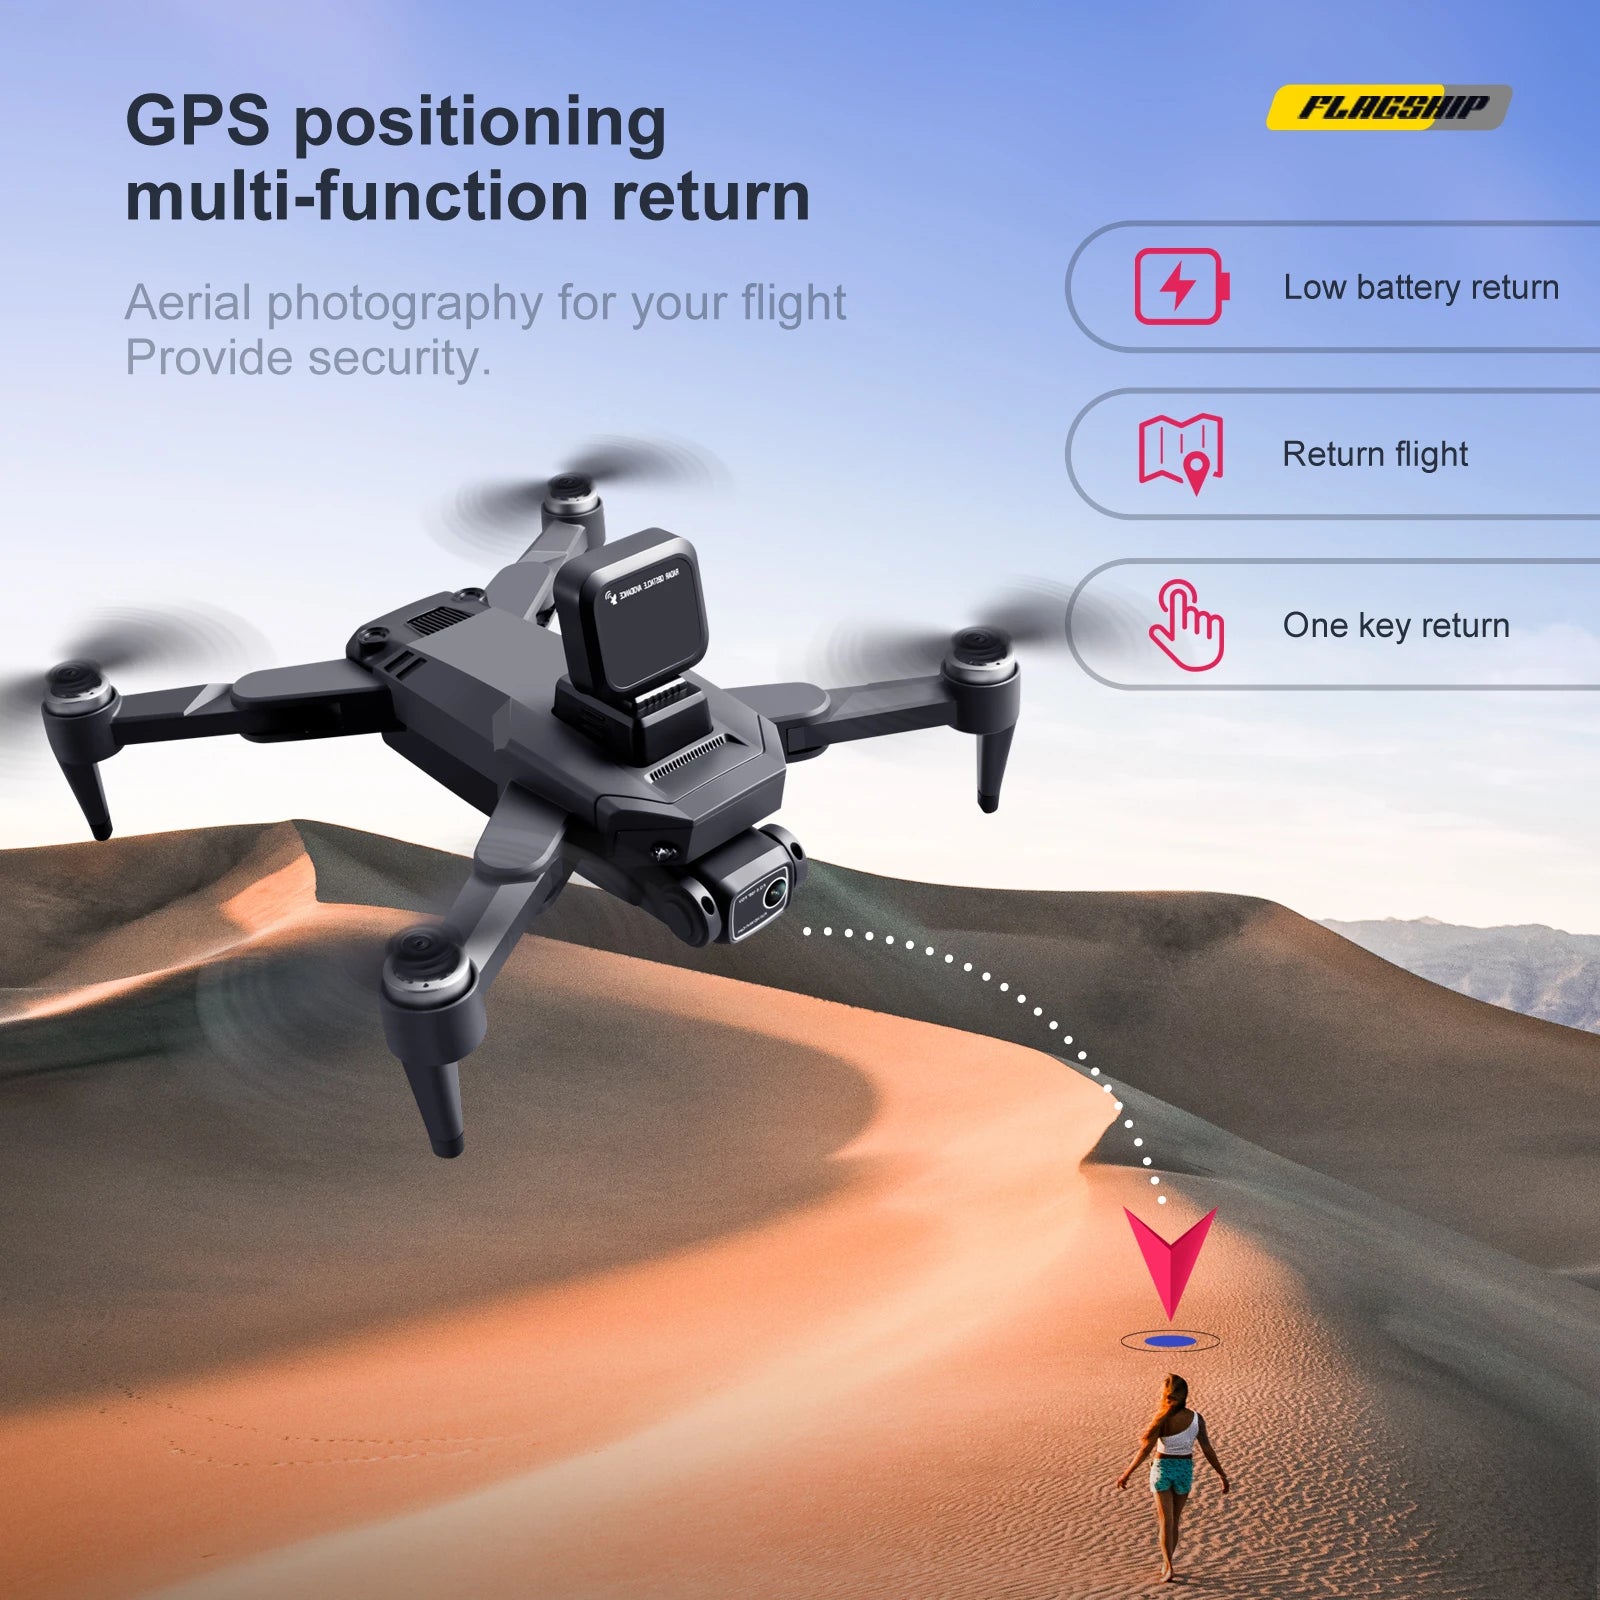 S109 GPS Drone, GPS positioning FLaEGHIP multi-function return Aerial photography for your flight Low